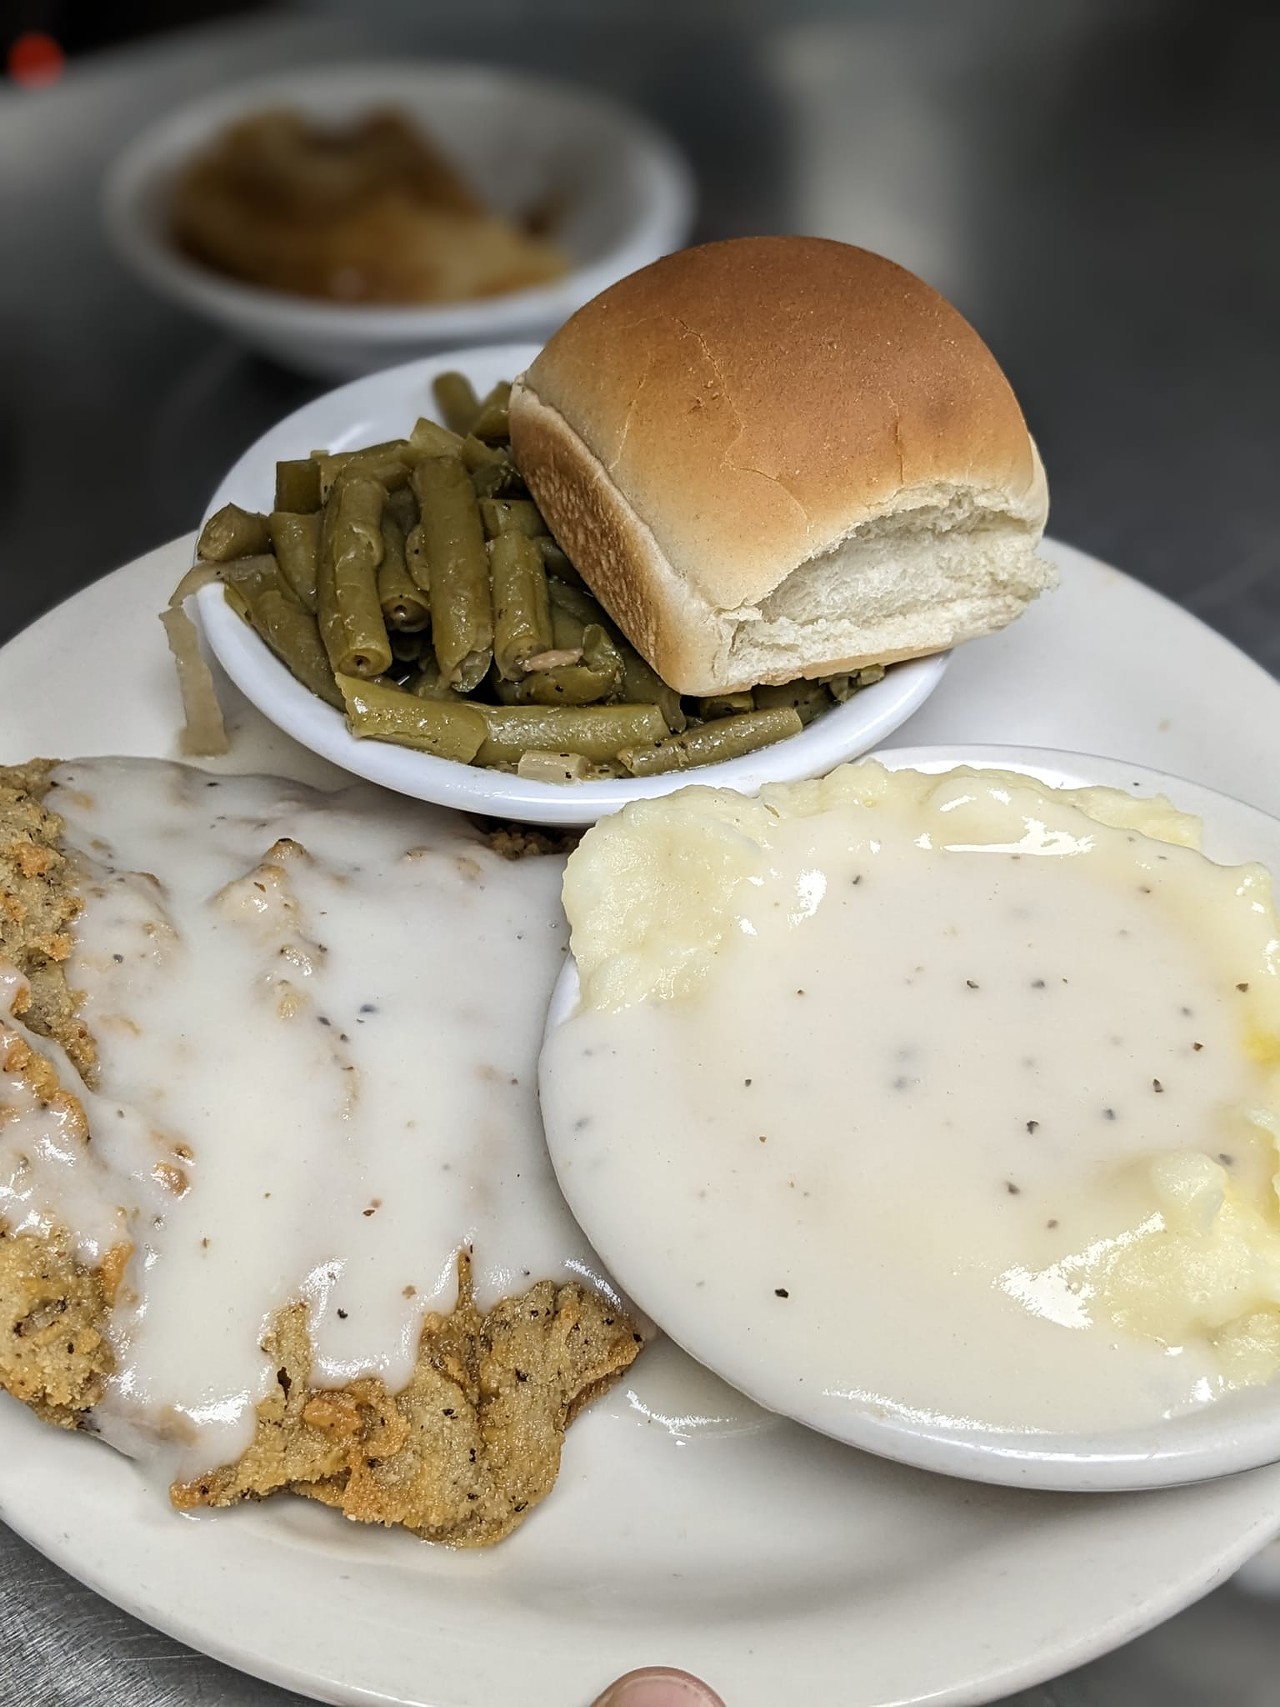 Cottage Inn
570 Eastern Pkwy 
Cottage Inn has been &#147;keeping the Southern comfort food tradition&#148; alive in Louisville, KY since 1929. Photo via  Cottage Inn